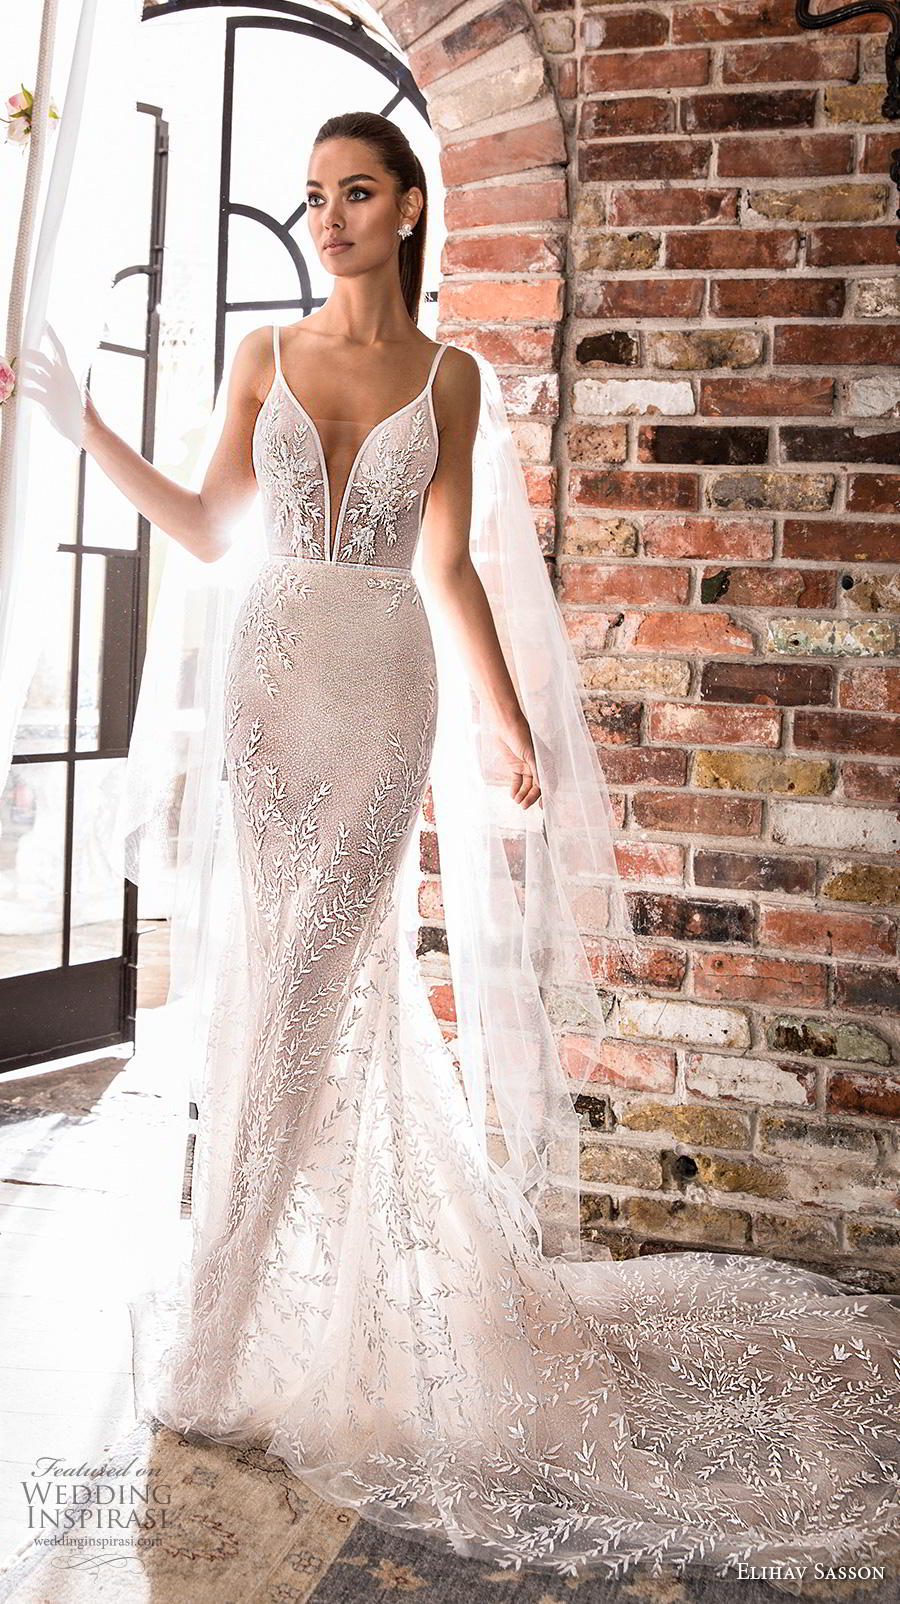 elihav sasson wedding dress 2015 attached long sleeves lace low cut back  sheath bridal gown back